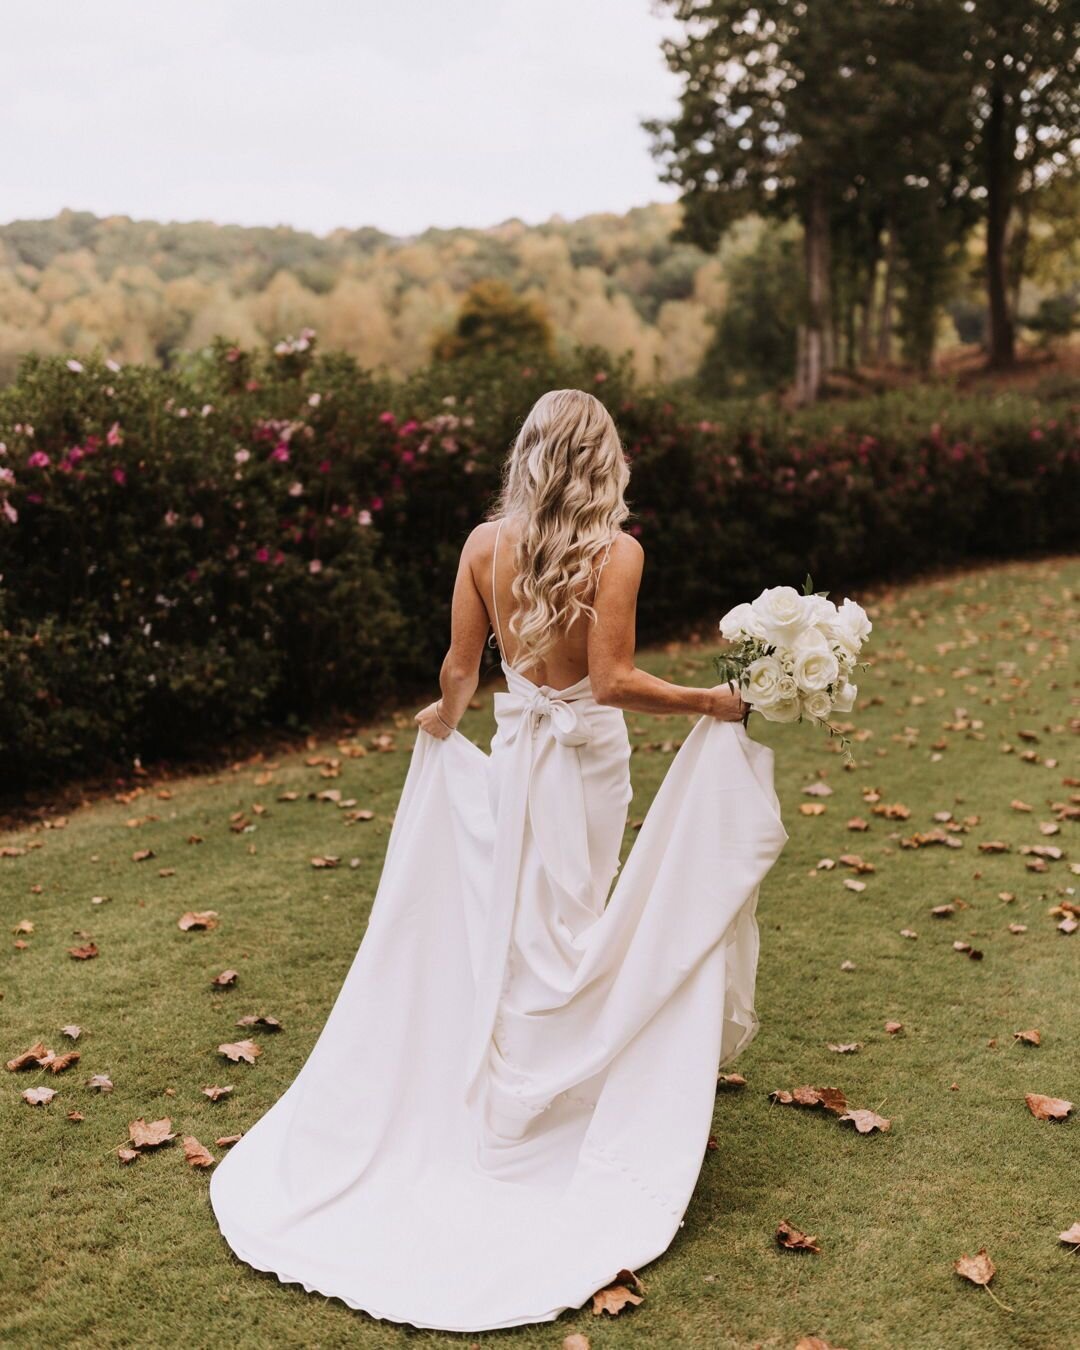 The back of this dress was on point👌What kind of design do you want for your dream day?